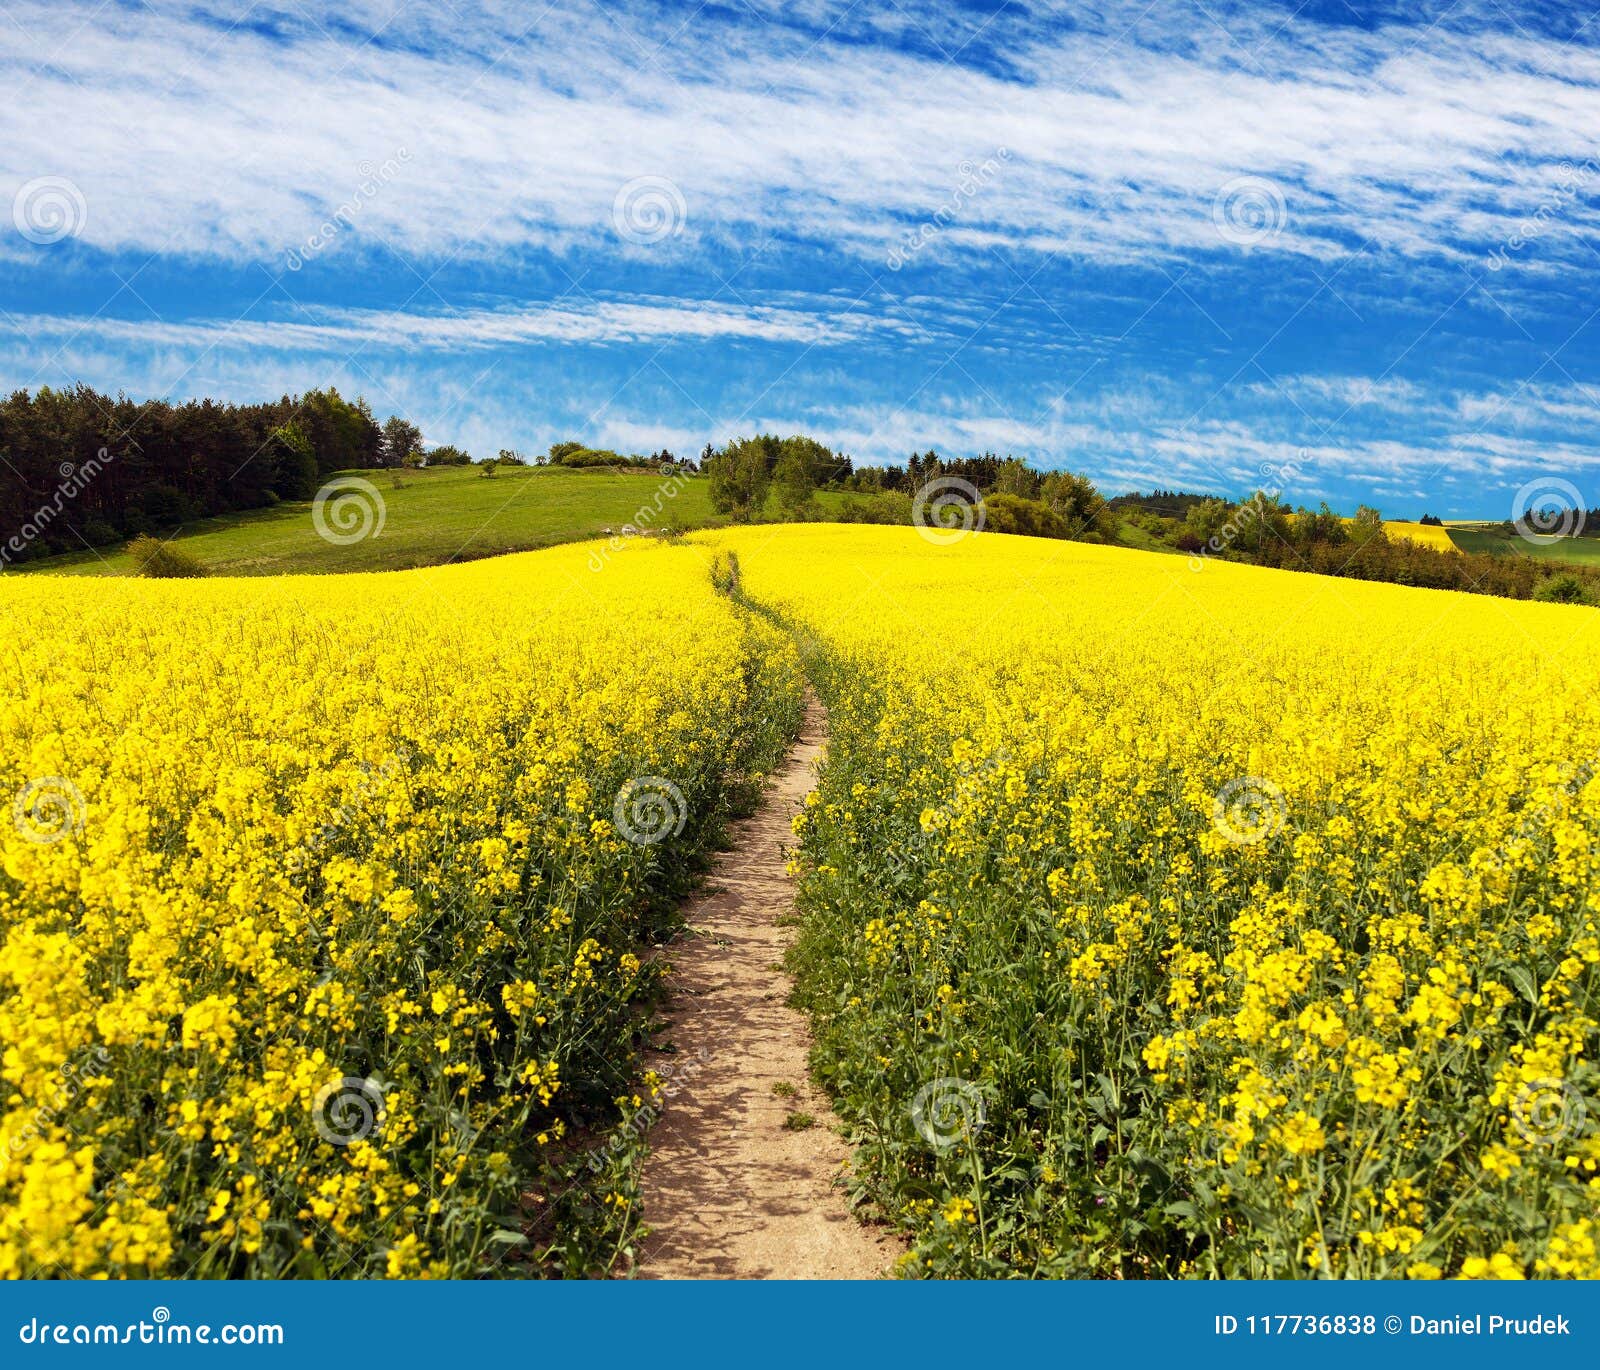 field of rapeseed, canola or colza with path way